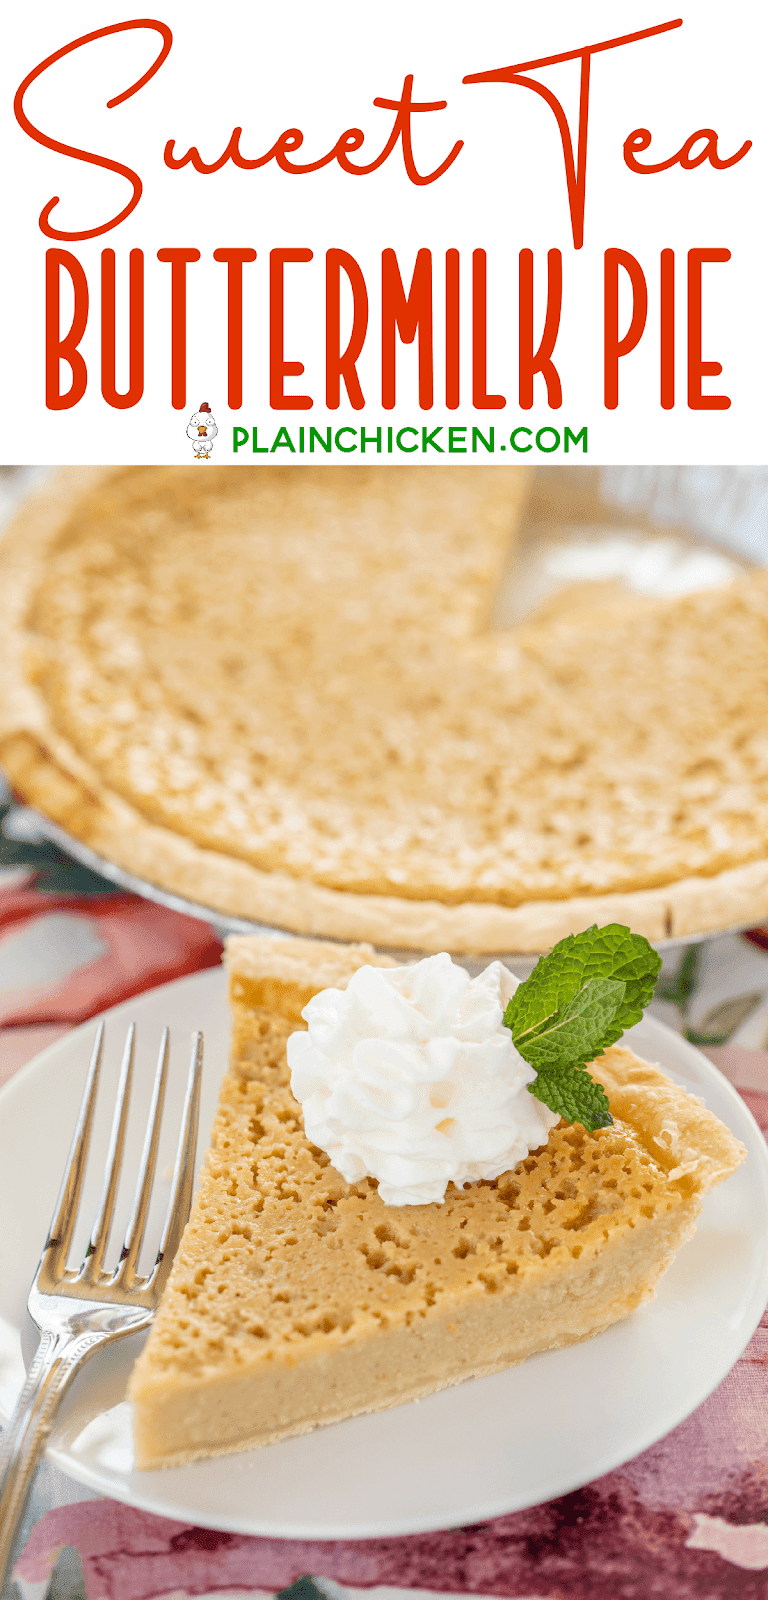 slice of pie topped with whipped cream and mint on a plate